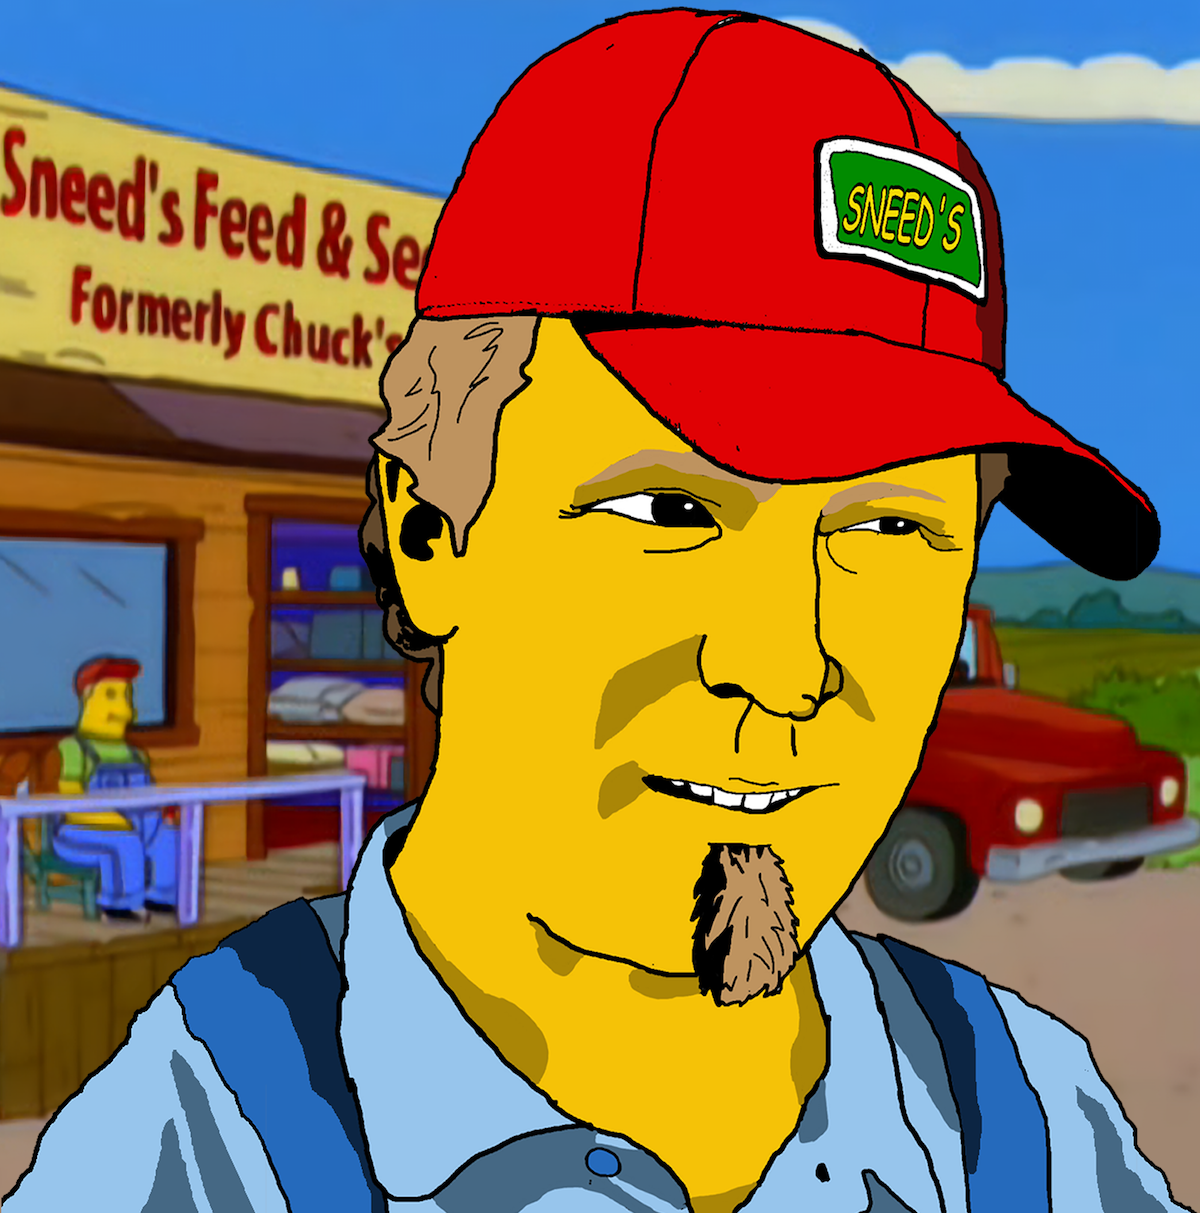 Sneed and Chuck. Sneed Feed and Seed. Sneeds Feed and Seed Мем. Sneed meme.